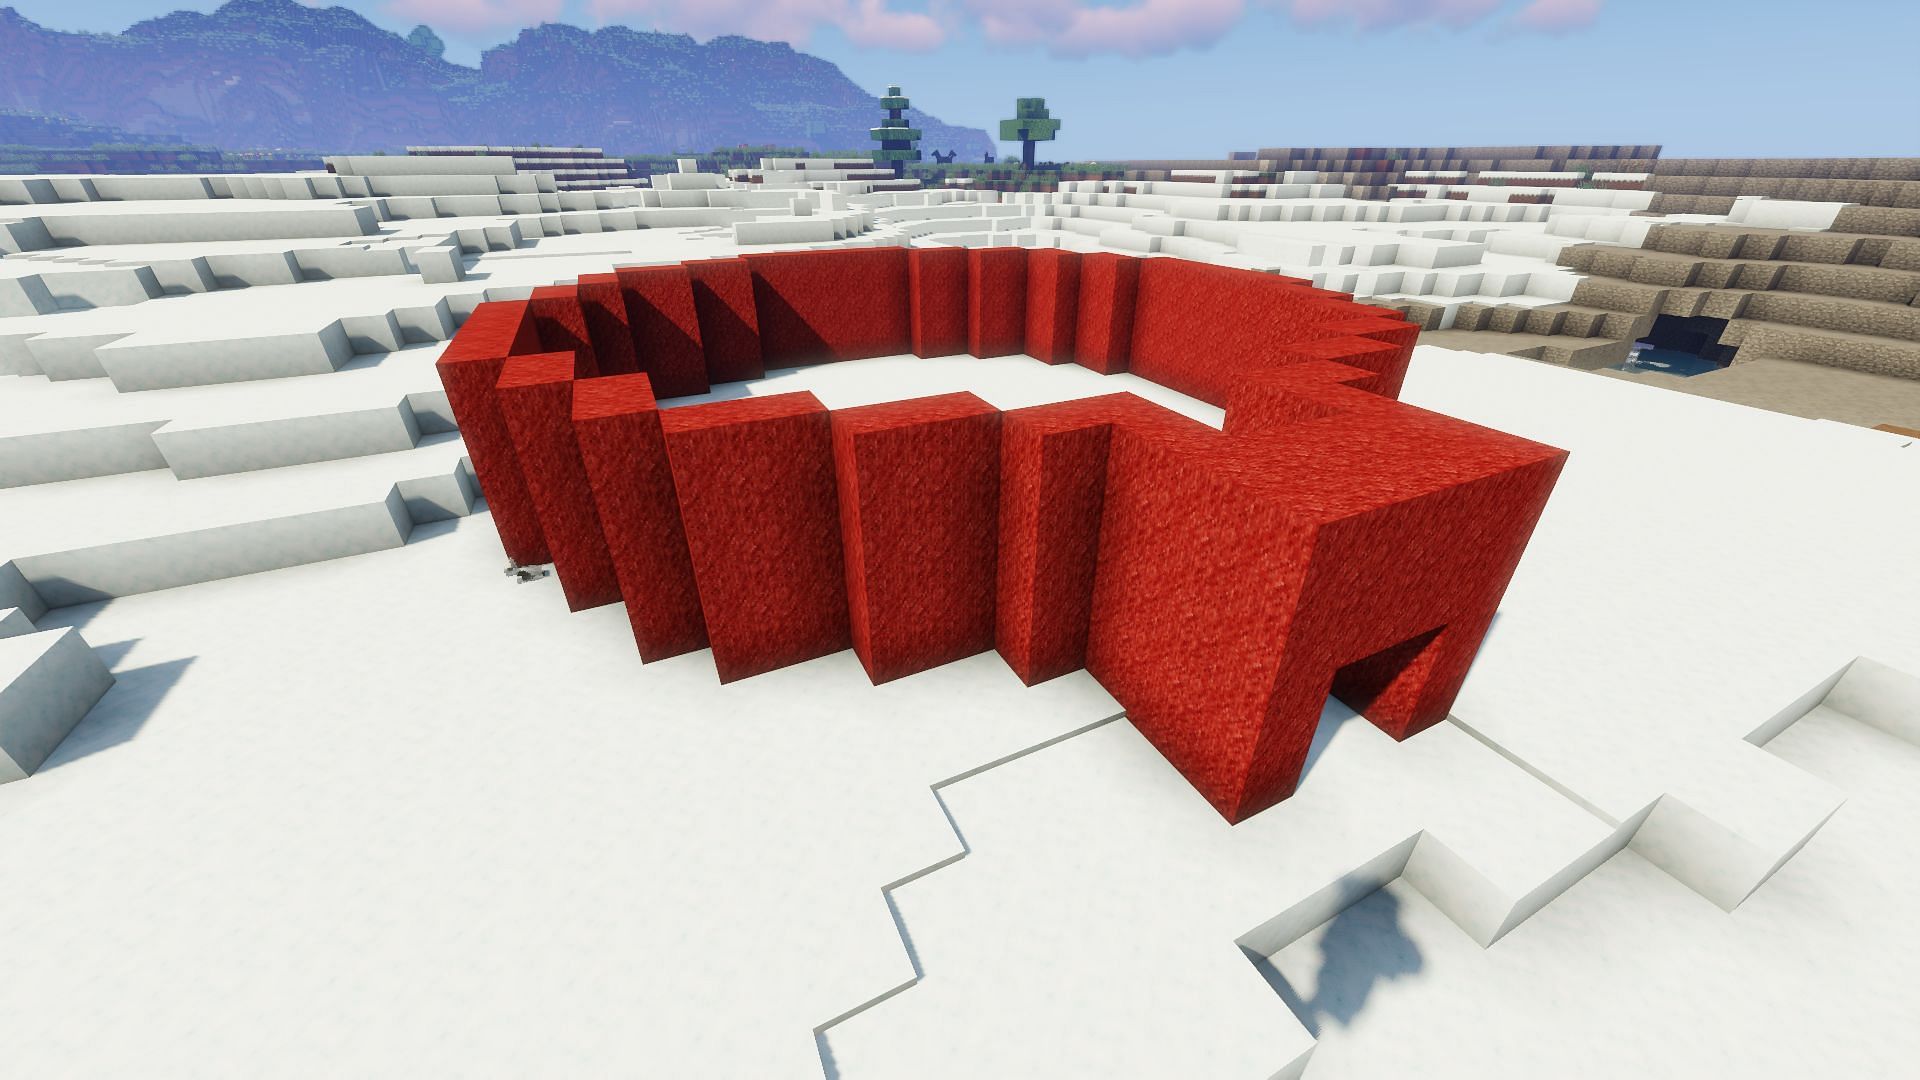 The baseline walls of the igloo built up (Image via Minecraft)